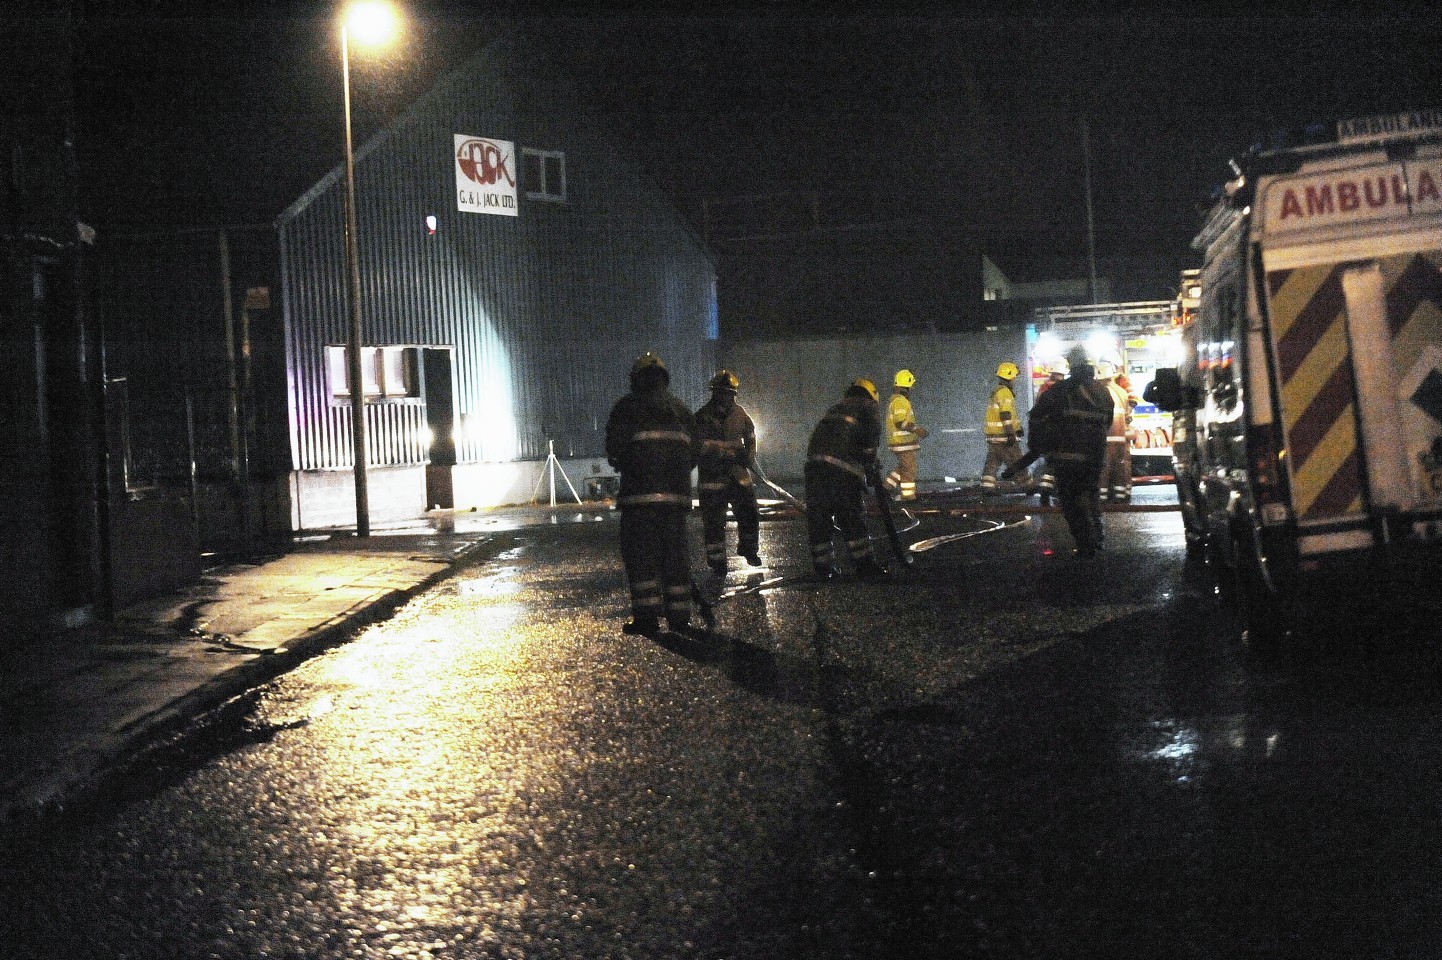 Fire services are now preparing to leave the scene following a blaze at the former G&J Jack Ltd